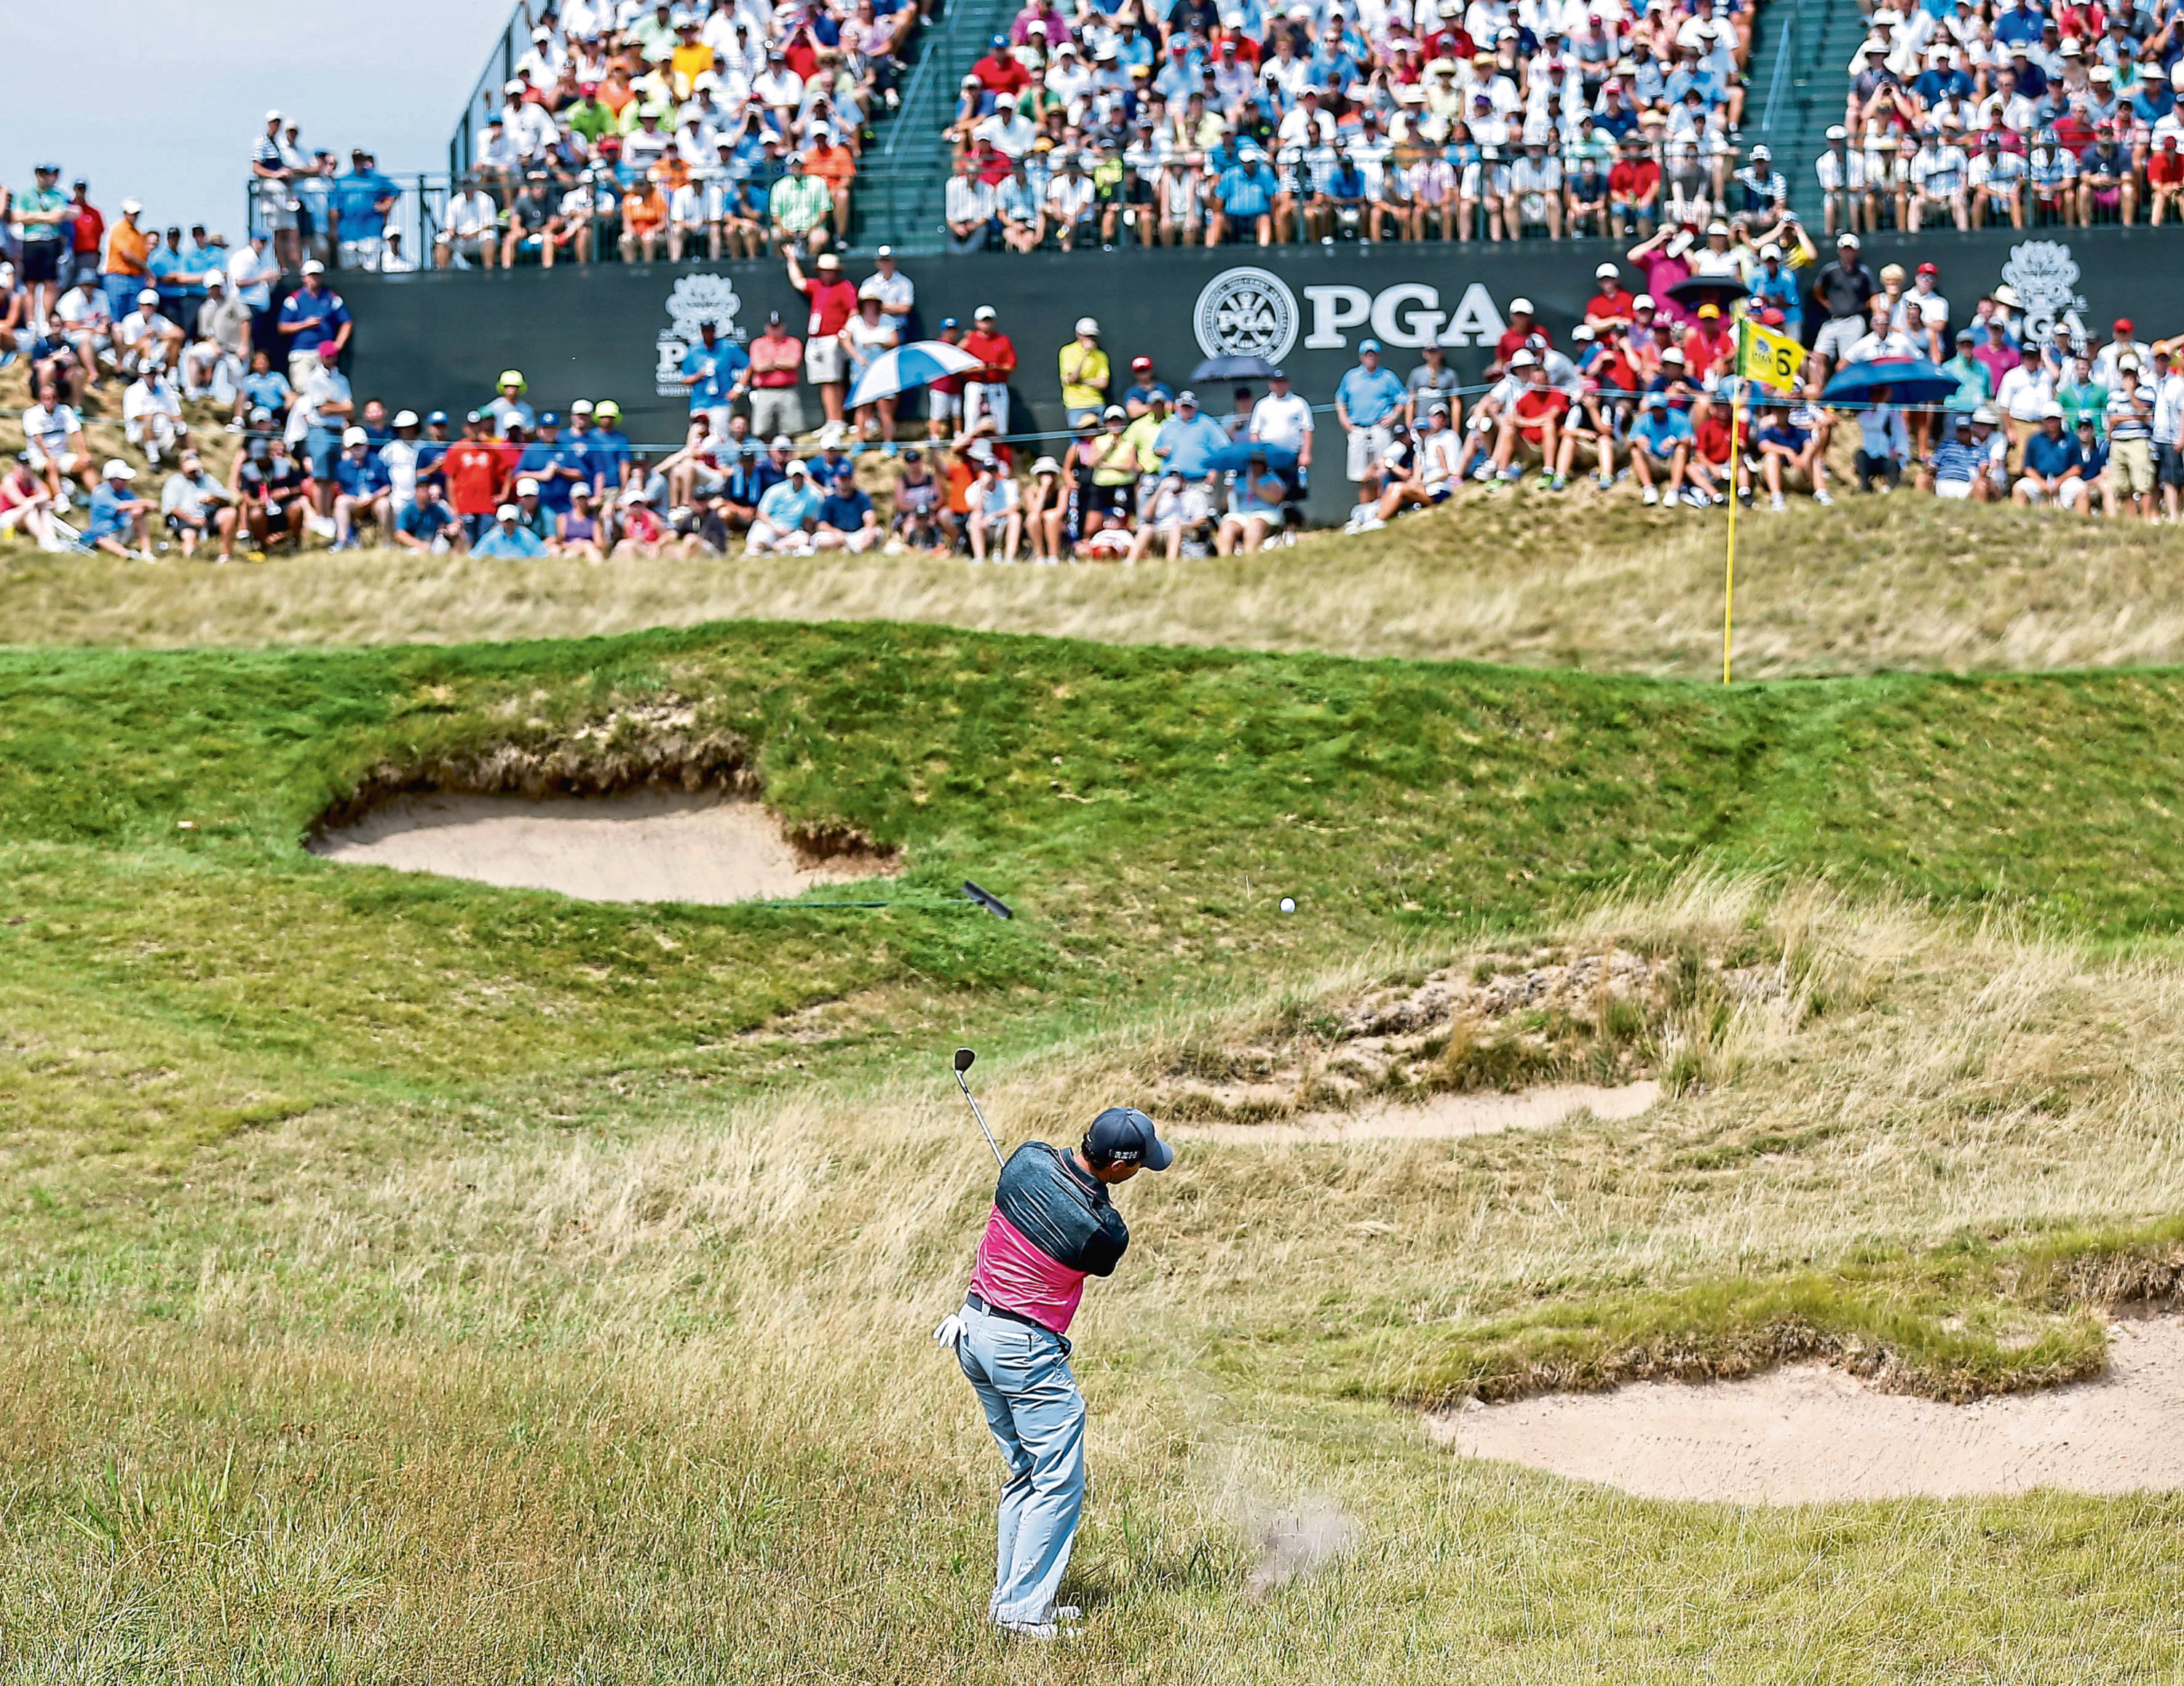 Rory McIlroy in a bunker at Whistling Straits in 2015. Both players and venue will feature prominently in 2020.